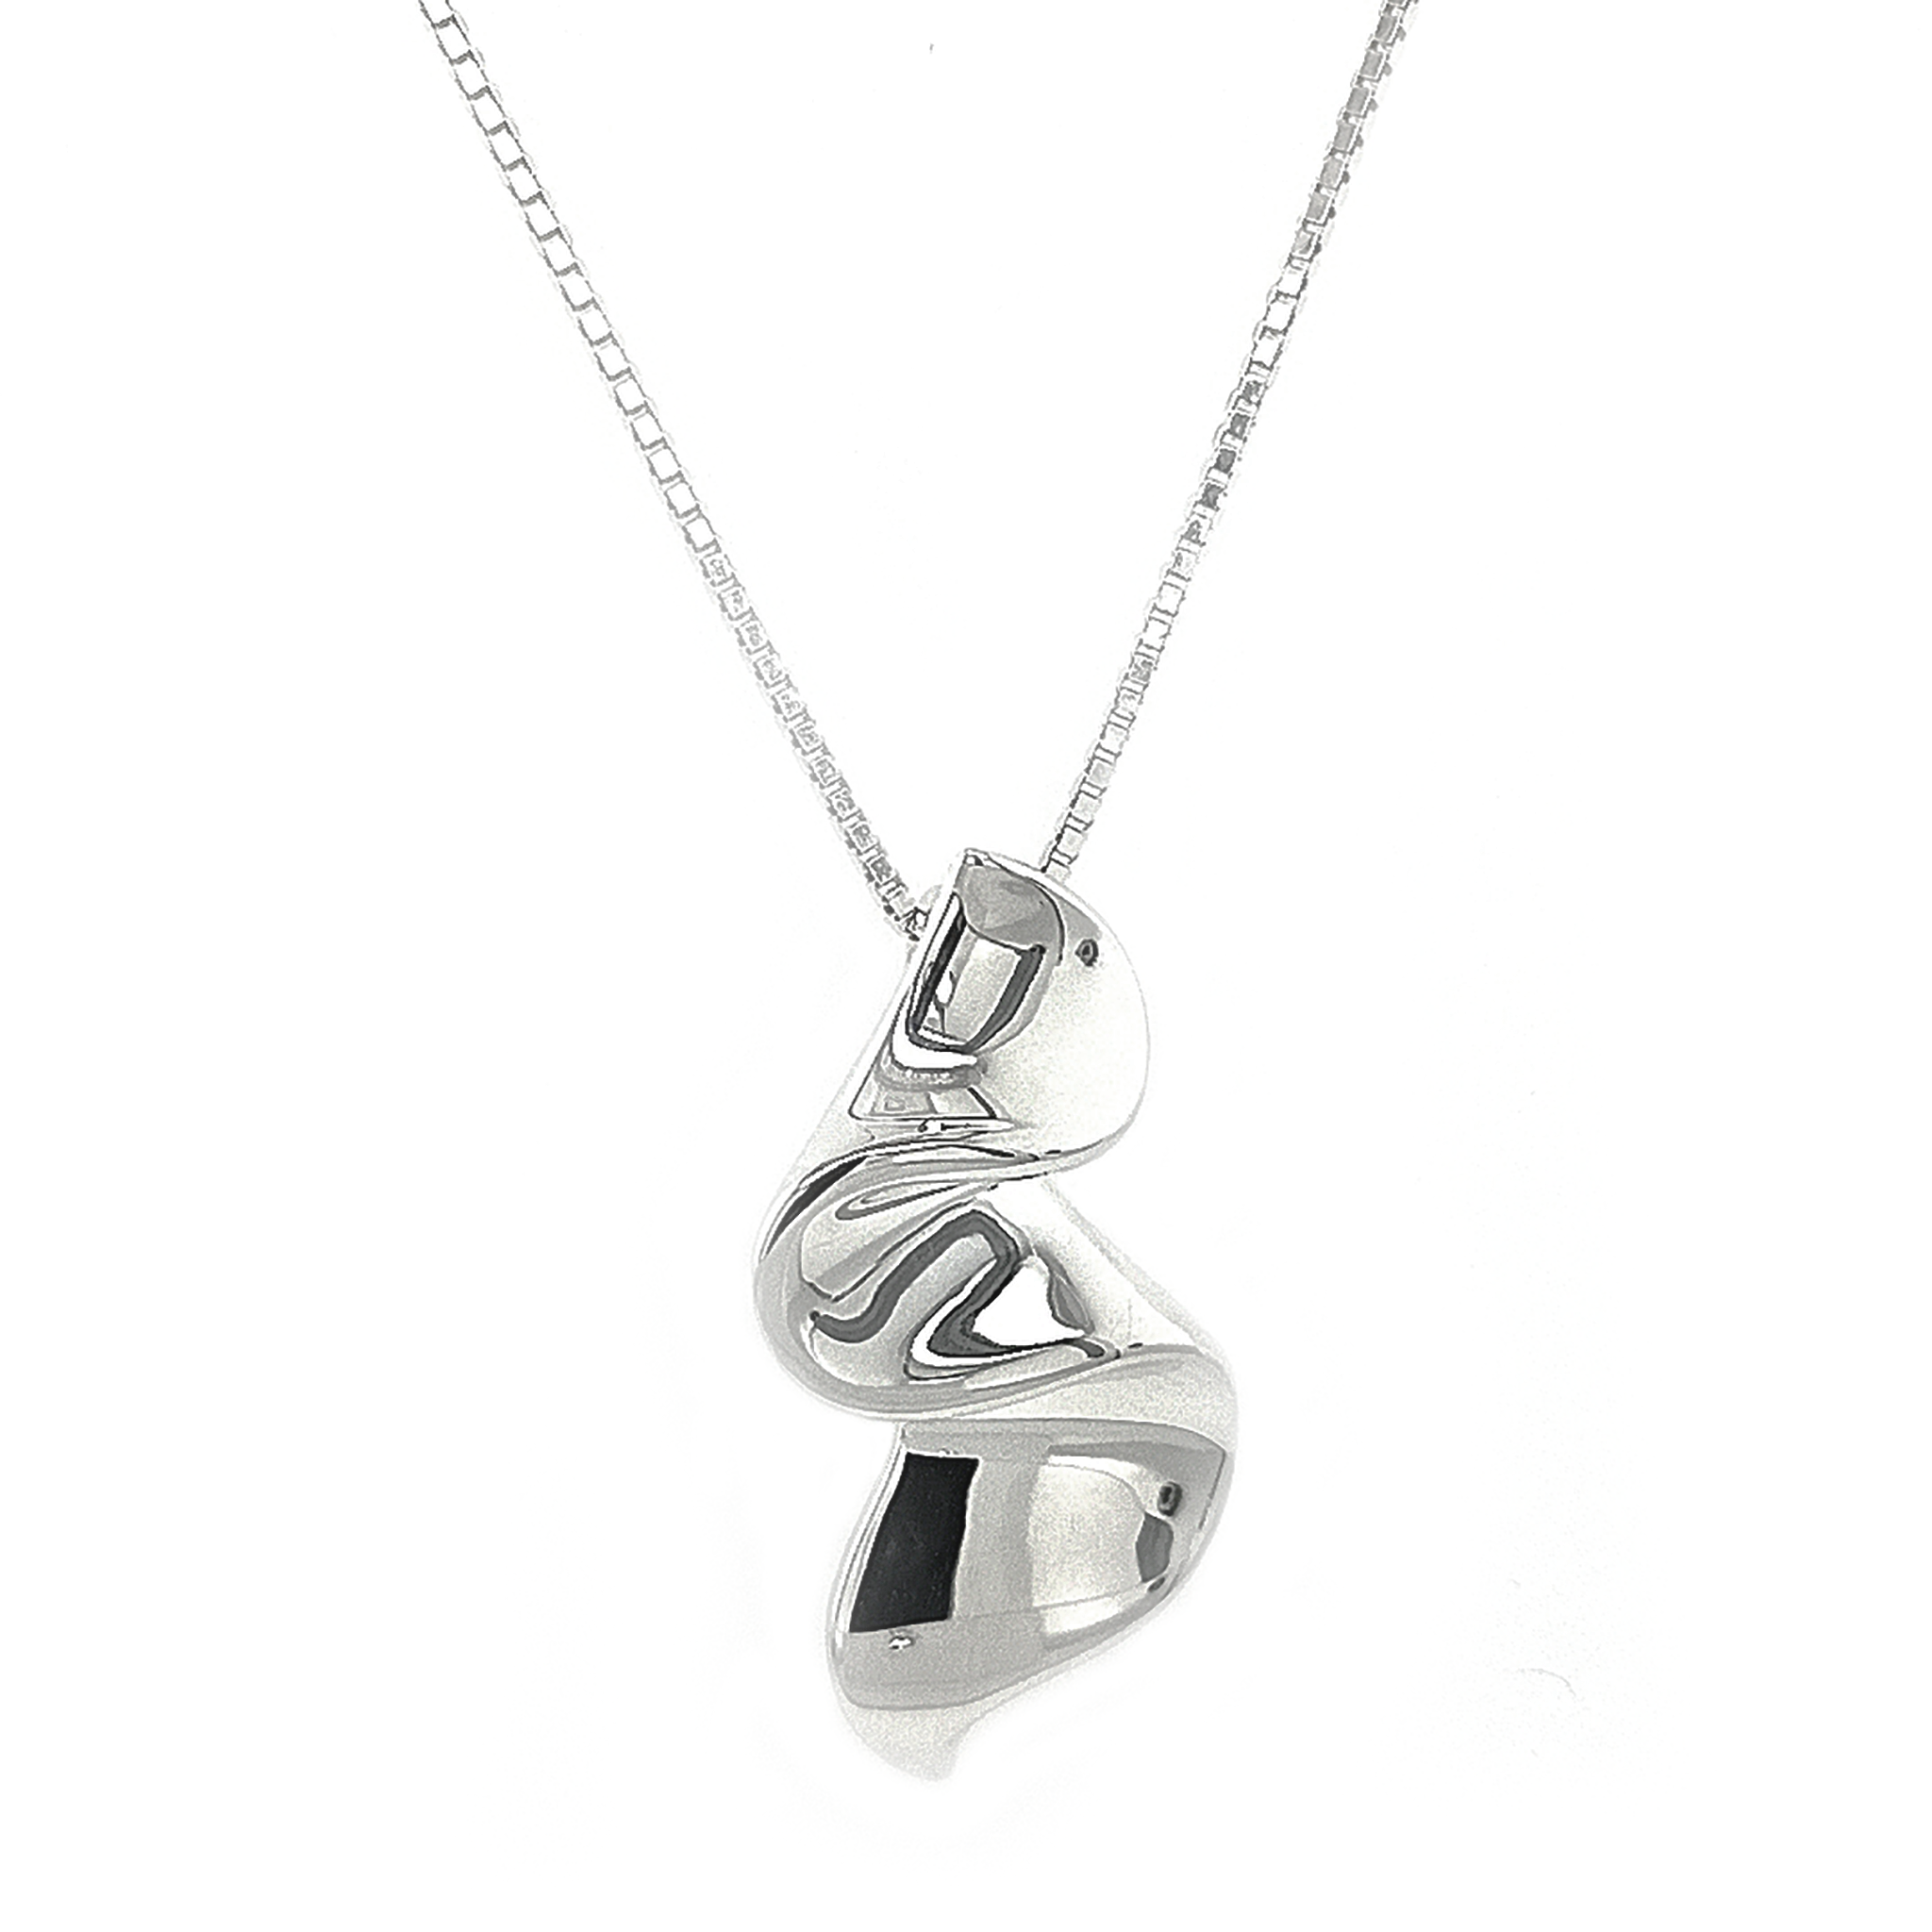 Silver polished wave pendant on chain